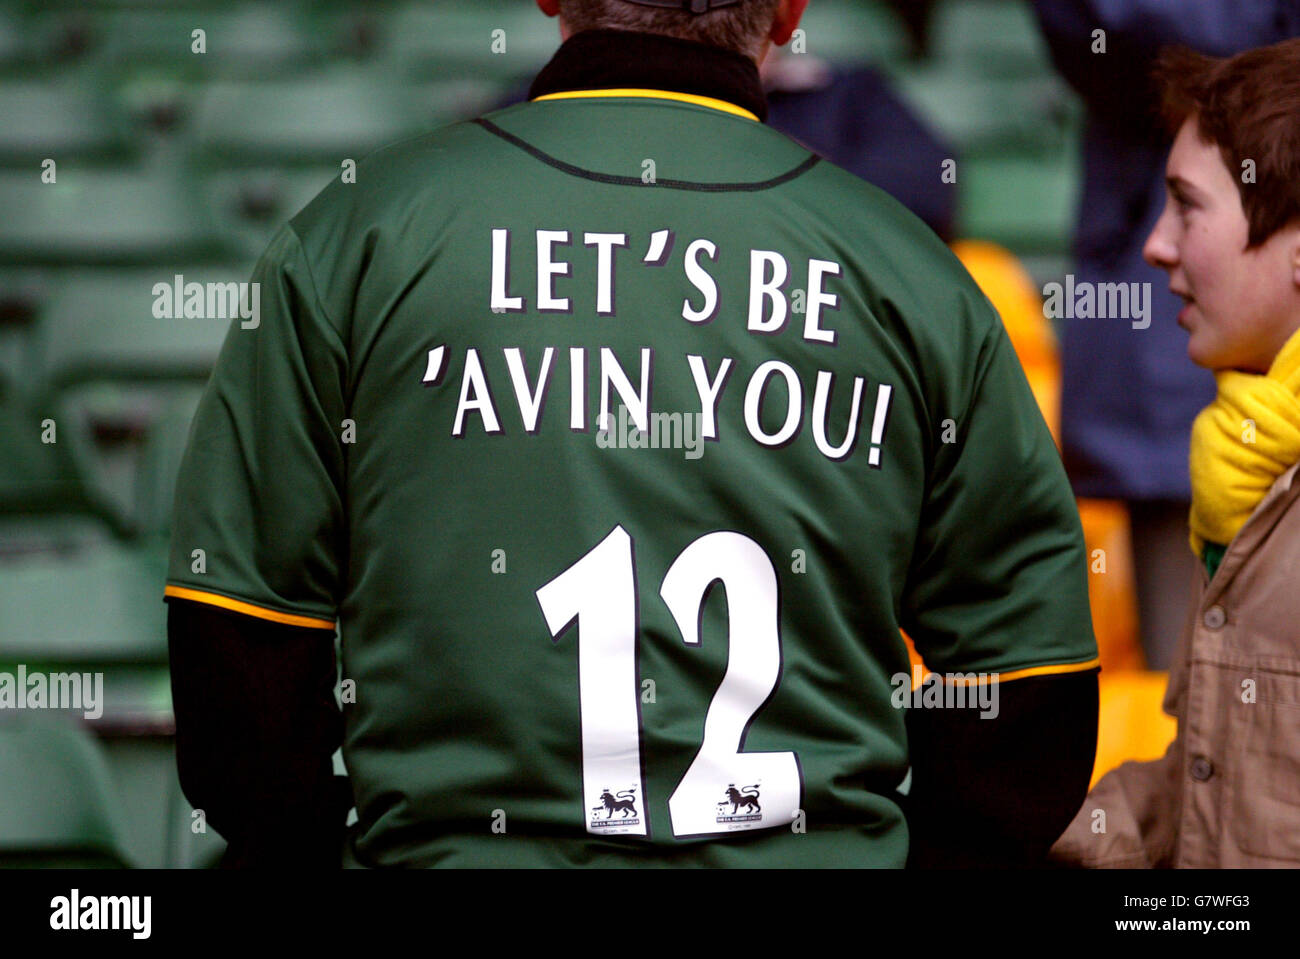 A Norwich fan with 'Lets be avin you!' on his shirt after Norwich City's director Delia Smith comments on the pitch earlier in the week Stock Photo